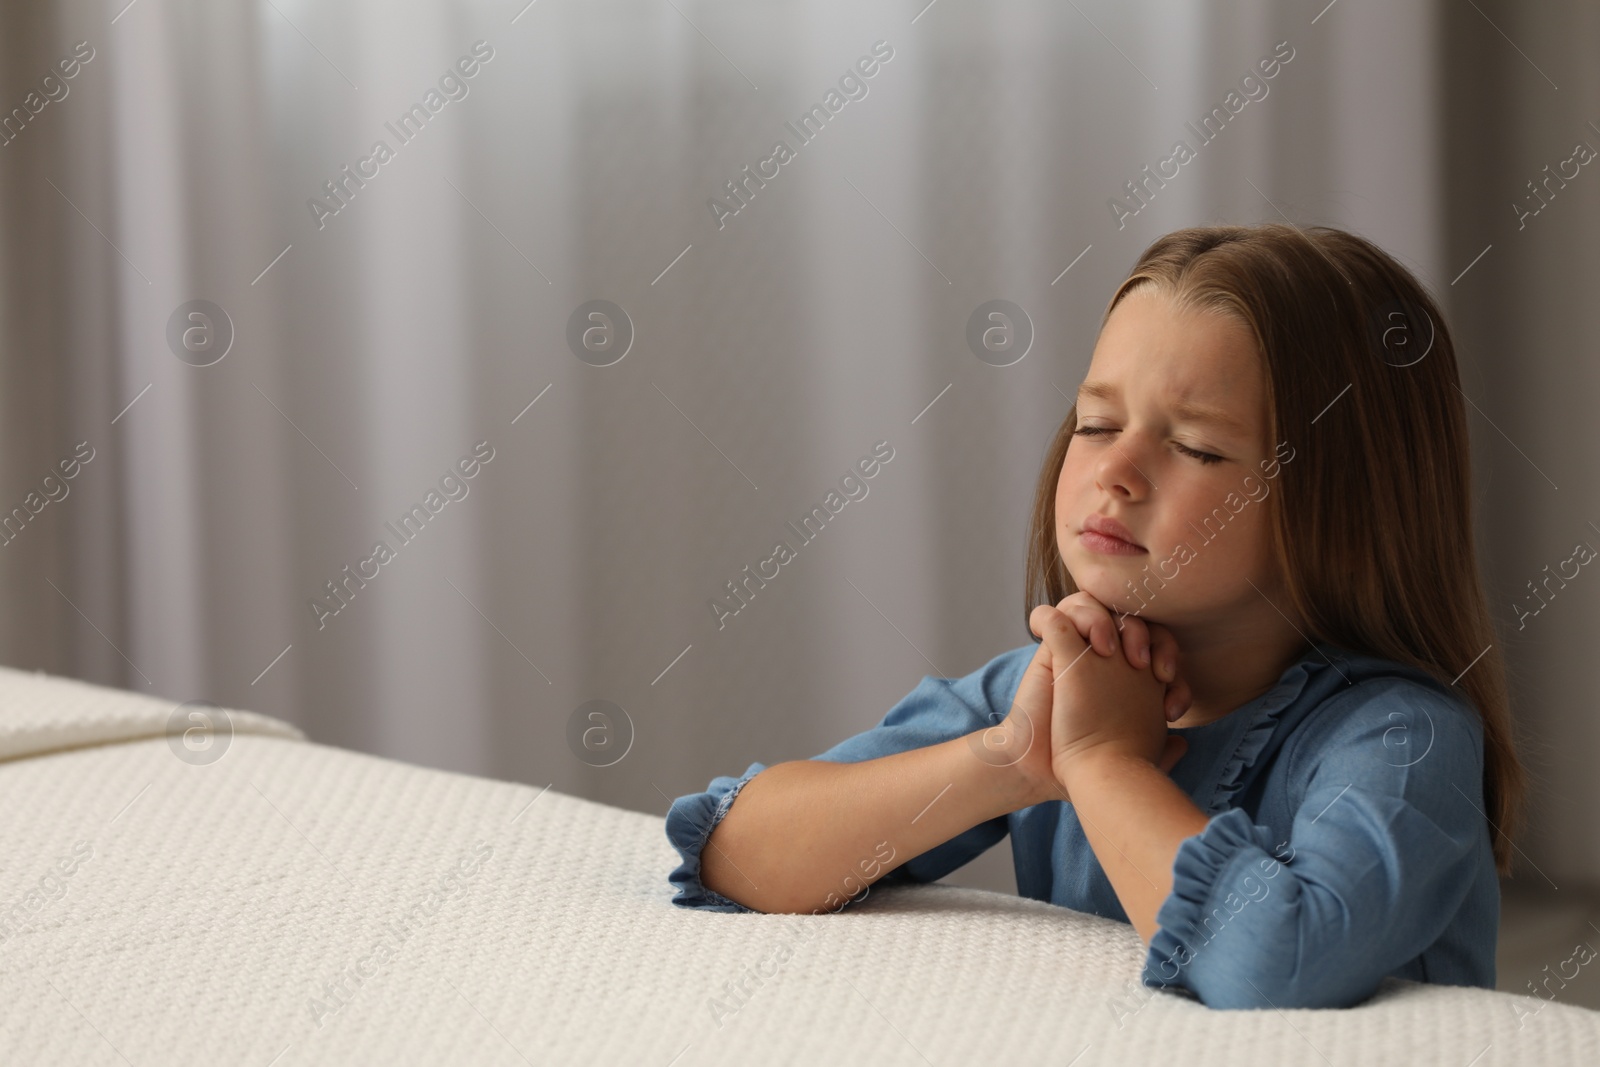 Photo of Cute little girl with hands clasped together saying bedtime prayer in bedroom. Space for text